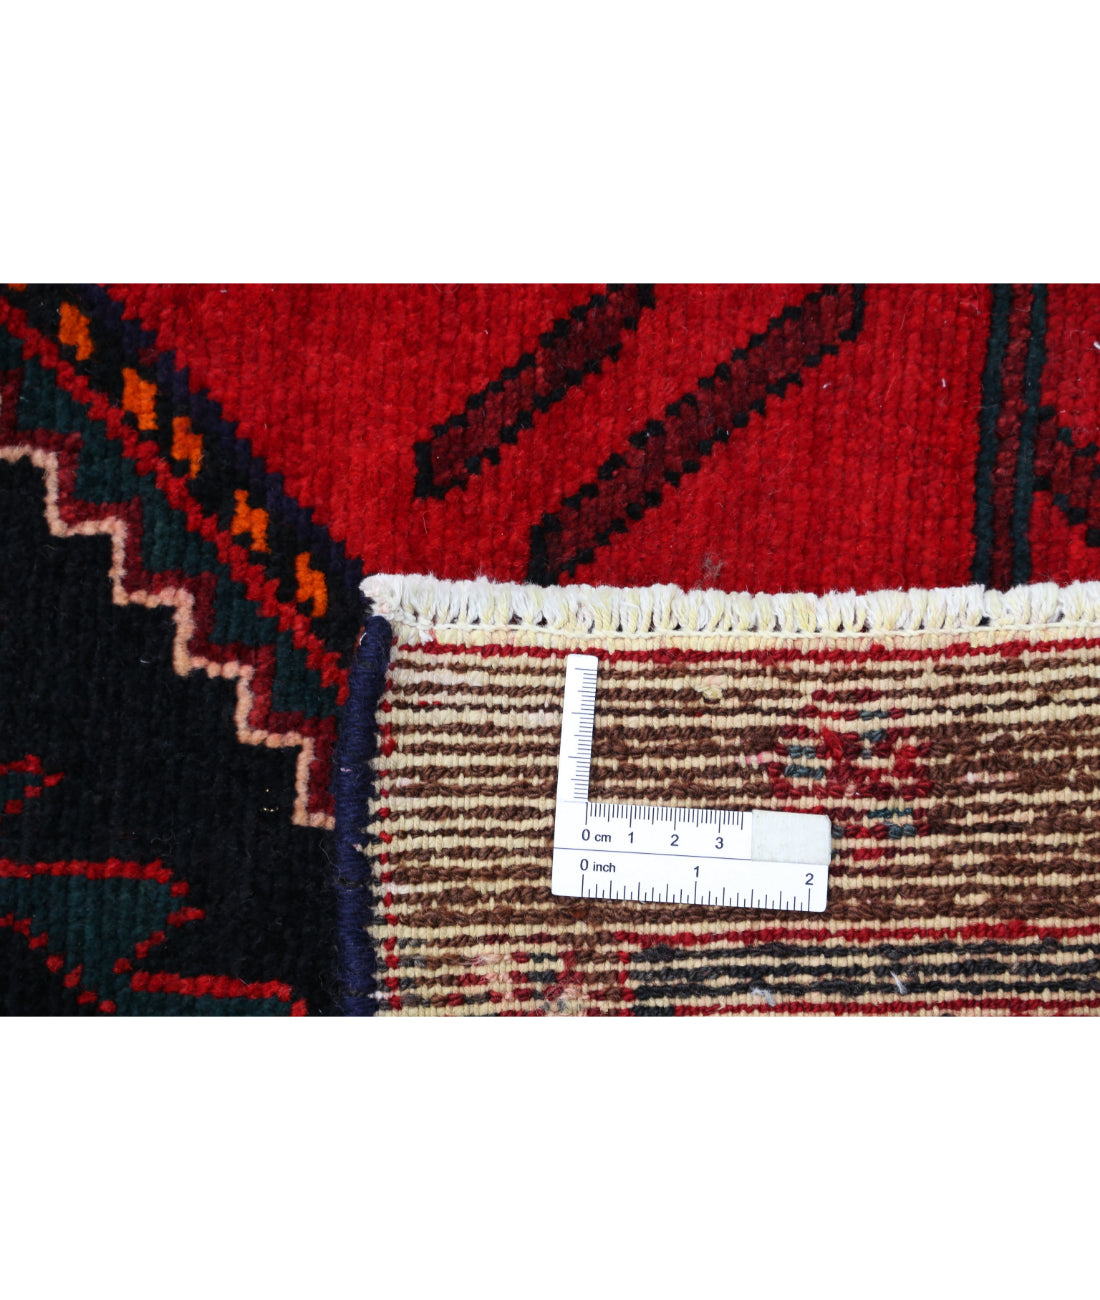 Hand Knotted Persian Hamadan Wool Rug - 5'3'' x 10'4'' 5'3'' x 10'4'' (158 X 310) / Black / Red